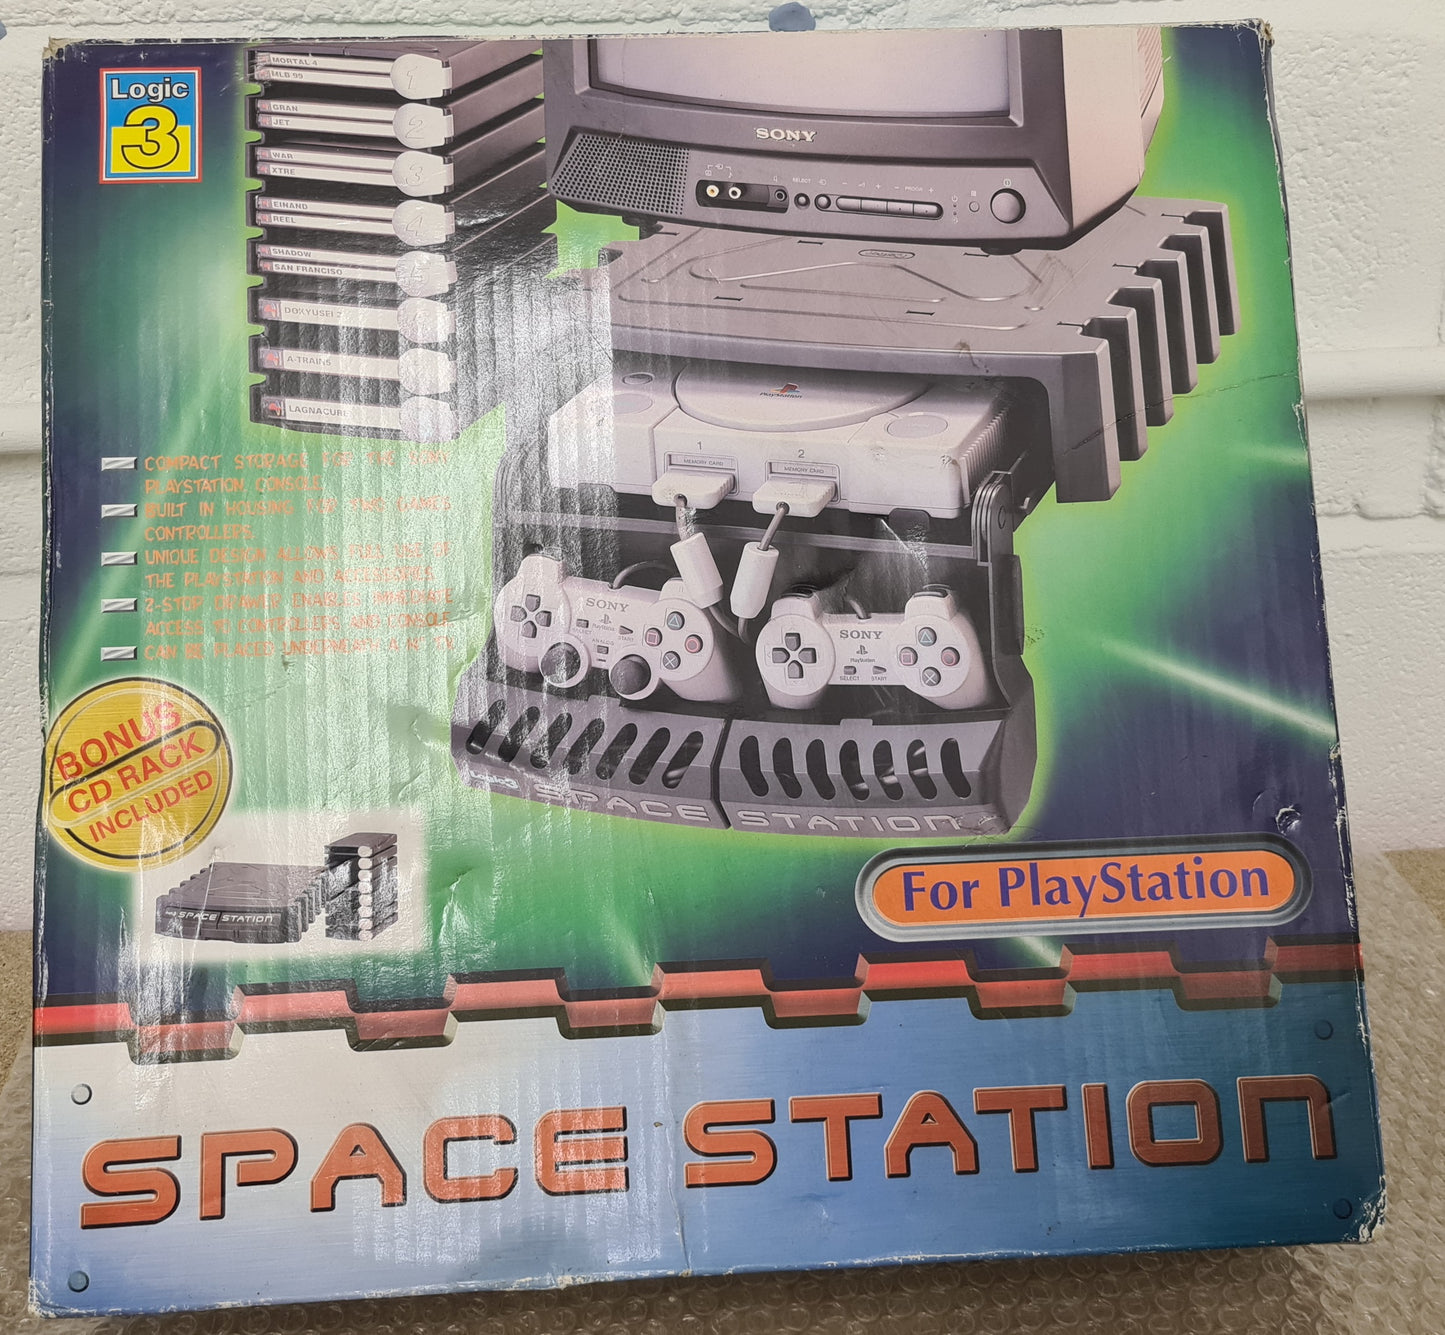 Logic3 Boxed Space Station Storage Unit Sony Playstation 1 (PS1) Accessory